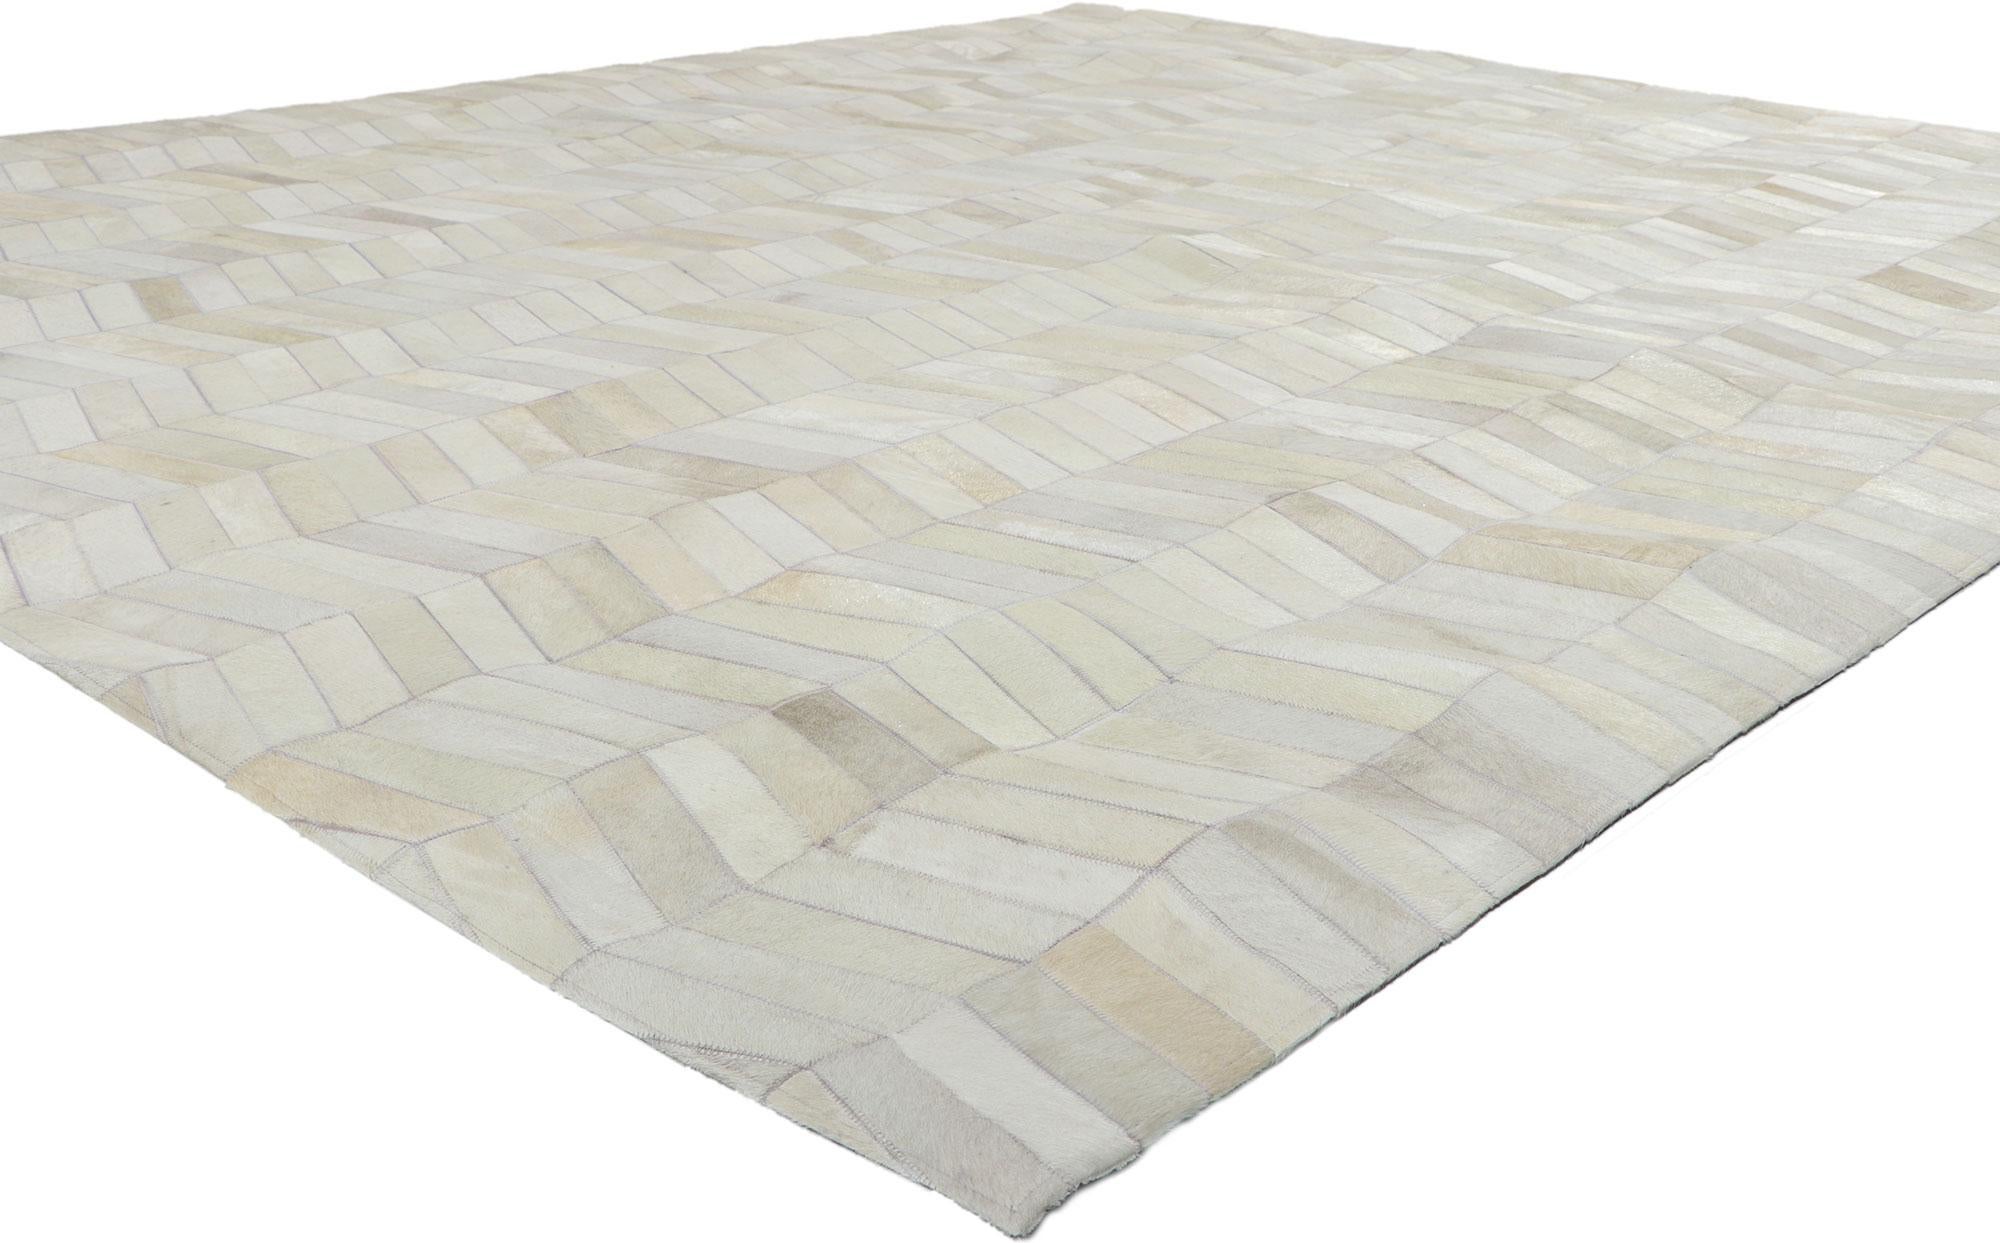 30910 New Contemporary Patchwork Cowhide rug with Modern style 08'00 x 09'10. Call the wild indoors and bring a sense of adventure home with this handcrafted cowhide rug. Showcasing a modern design, incredible detail and texture, this leather